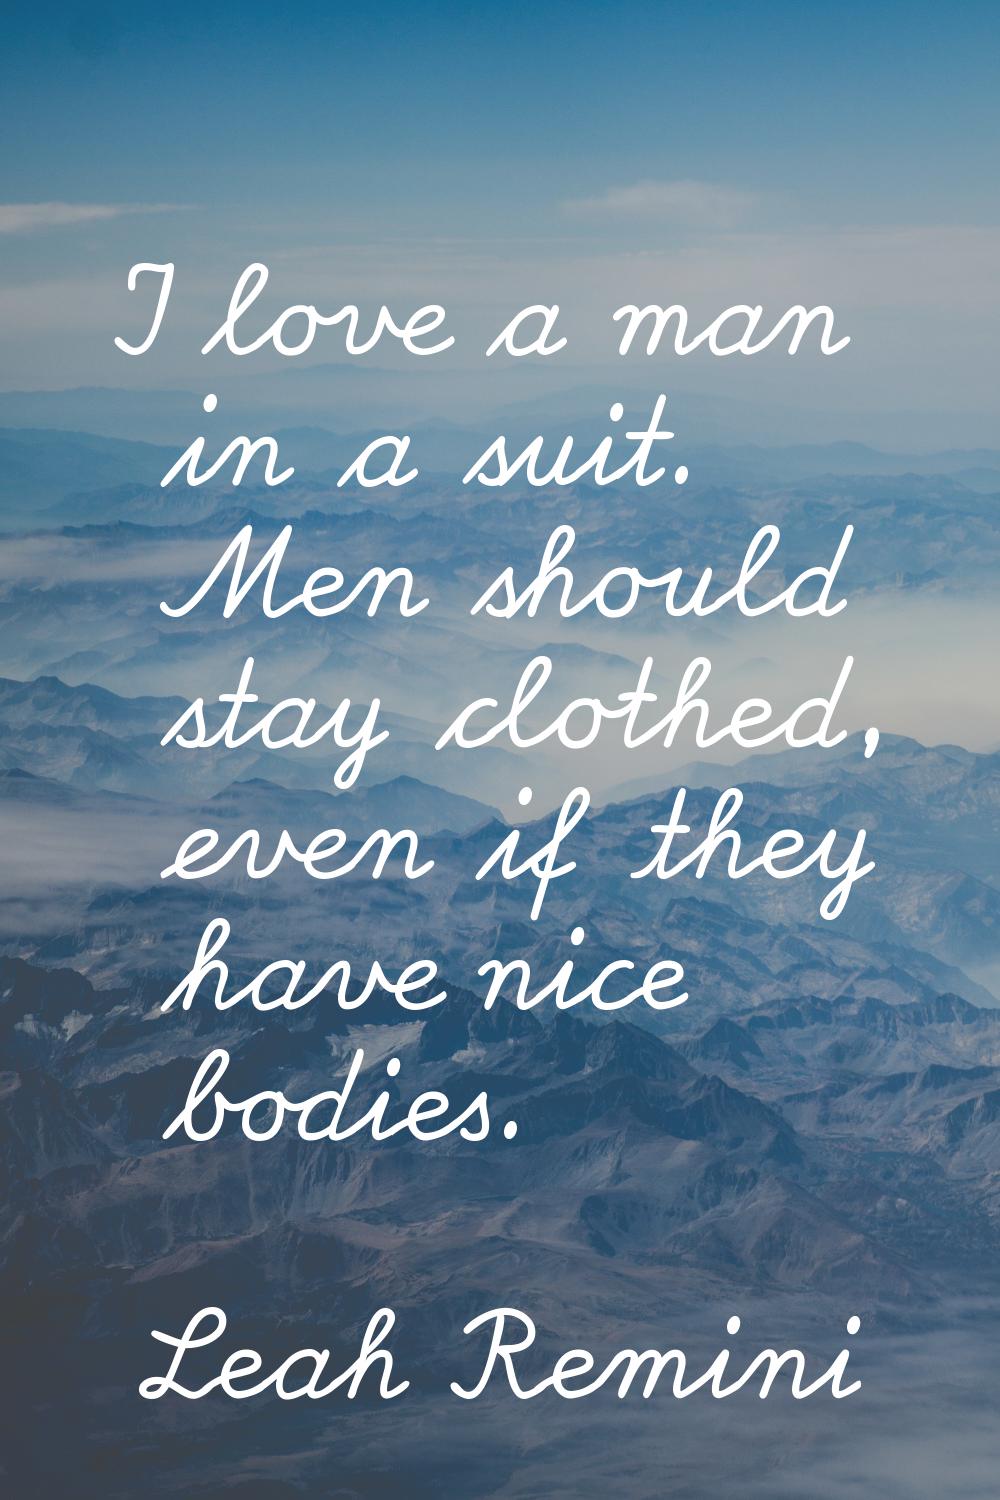 I love a man in a suit. Men should stay clothed, even if they have nice bodies.